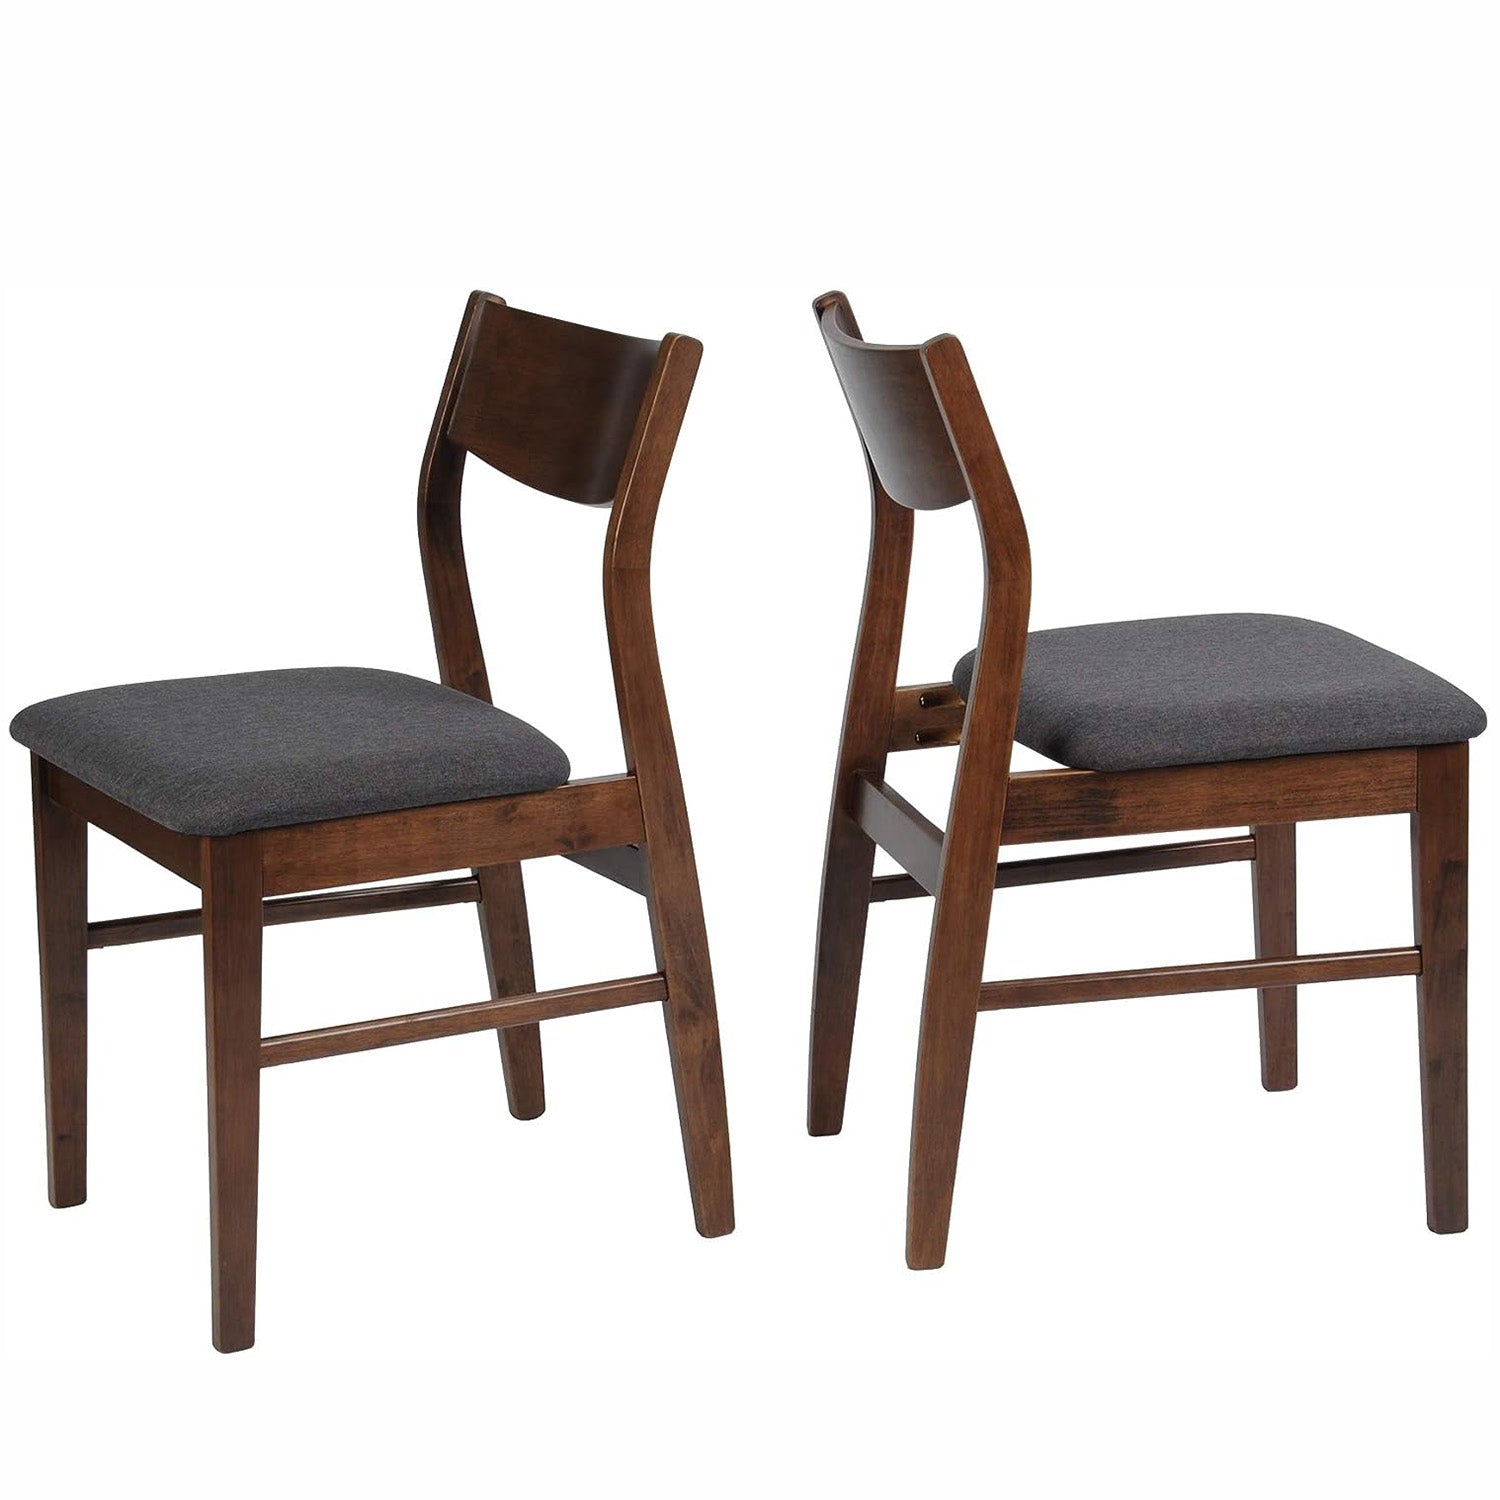 Set of 2 Dining Chairs Mid Century Upholstered Side Chairs with Rubber Wood Frame